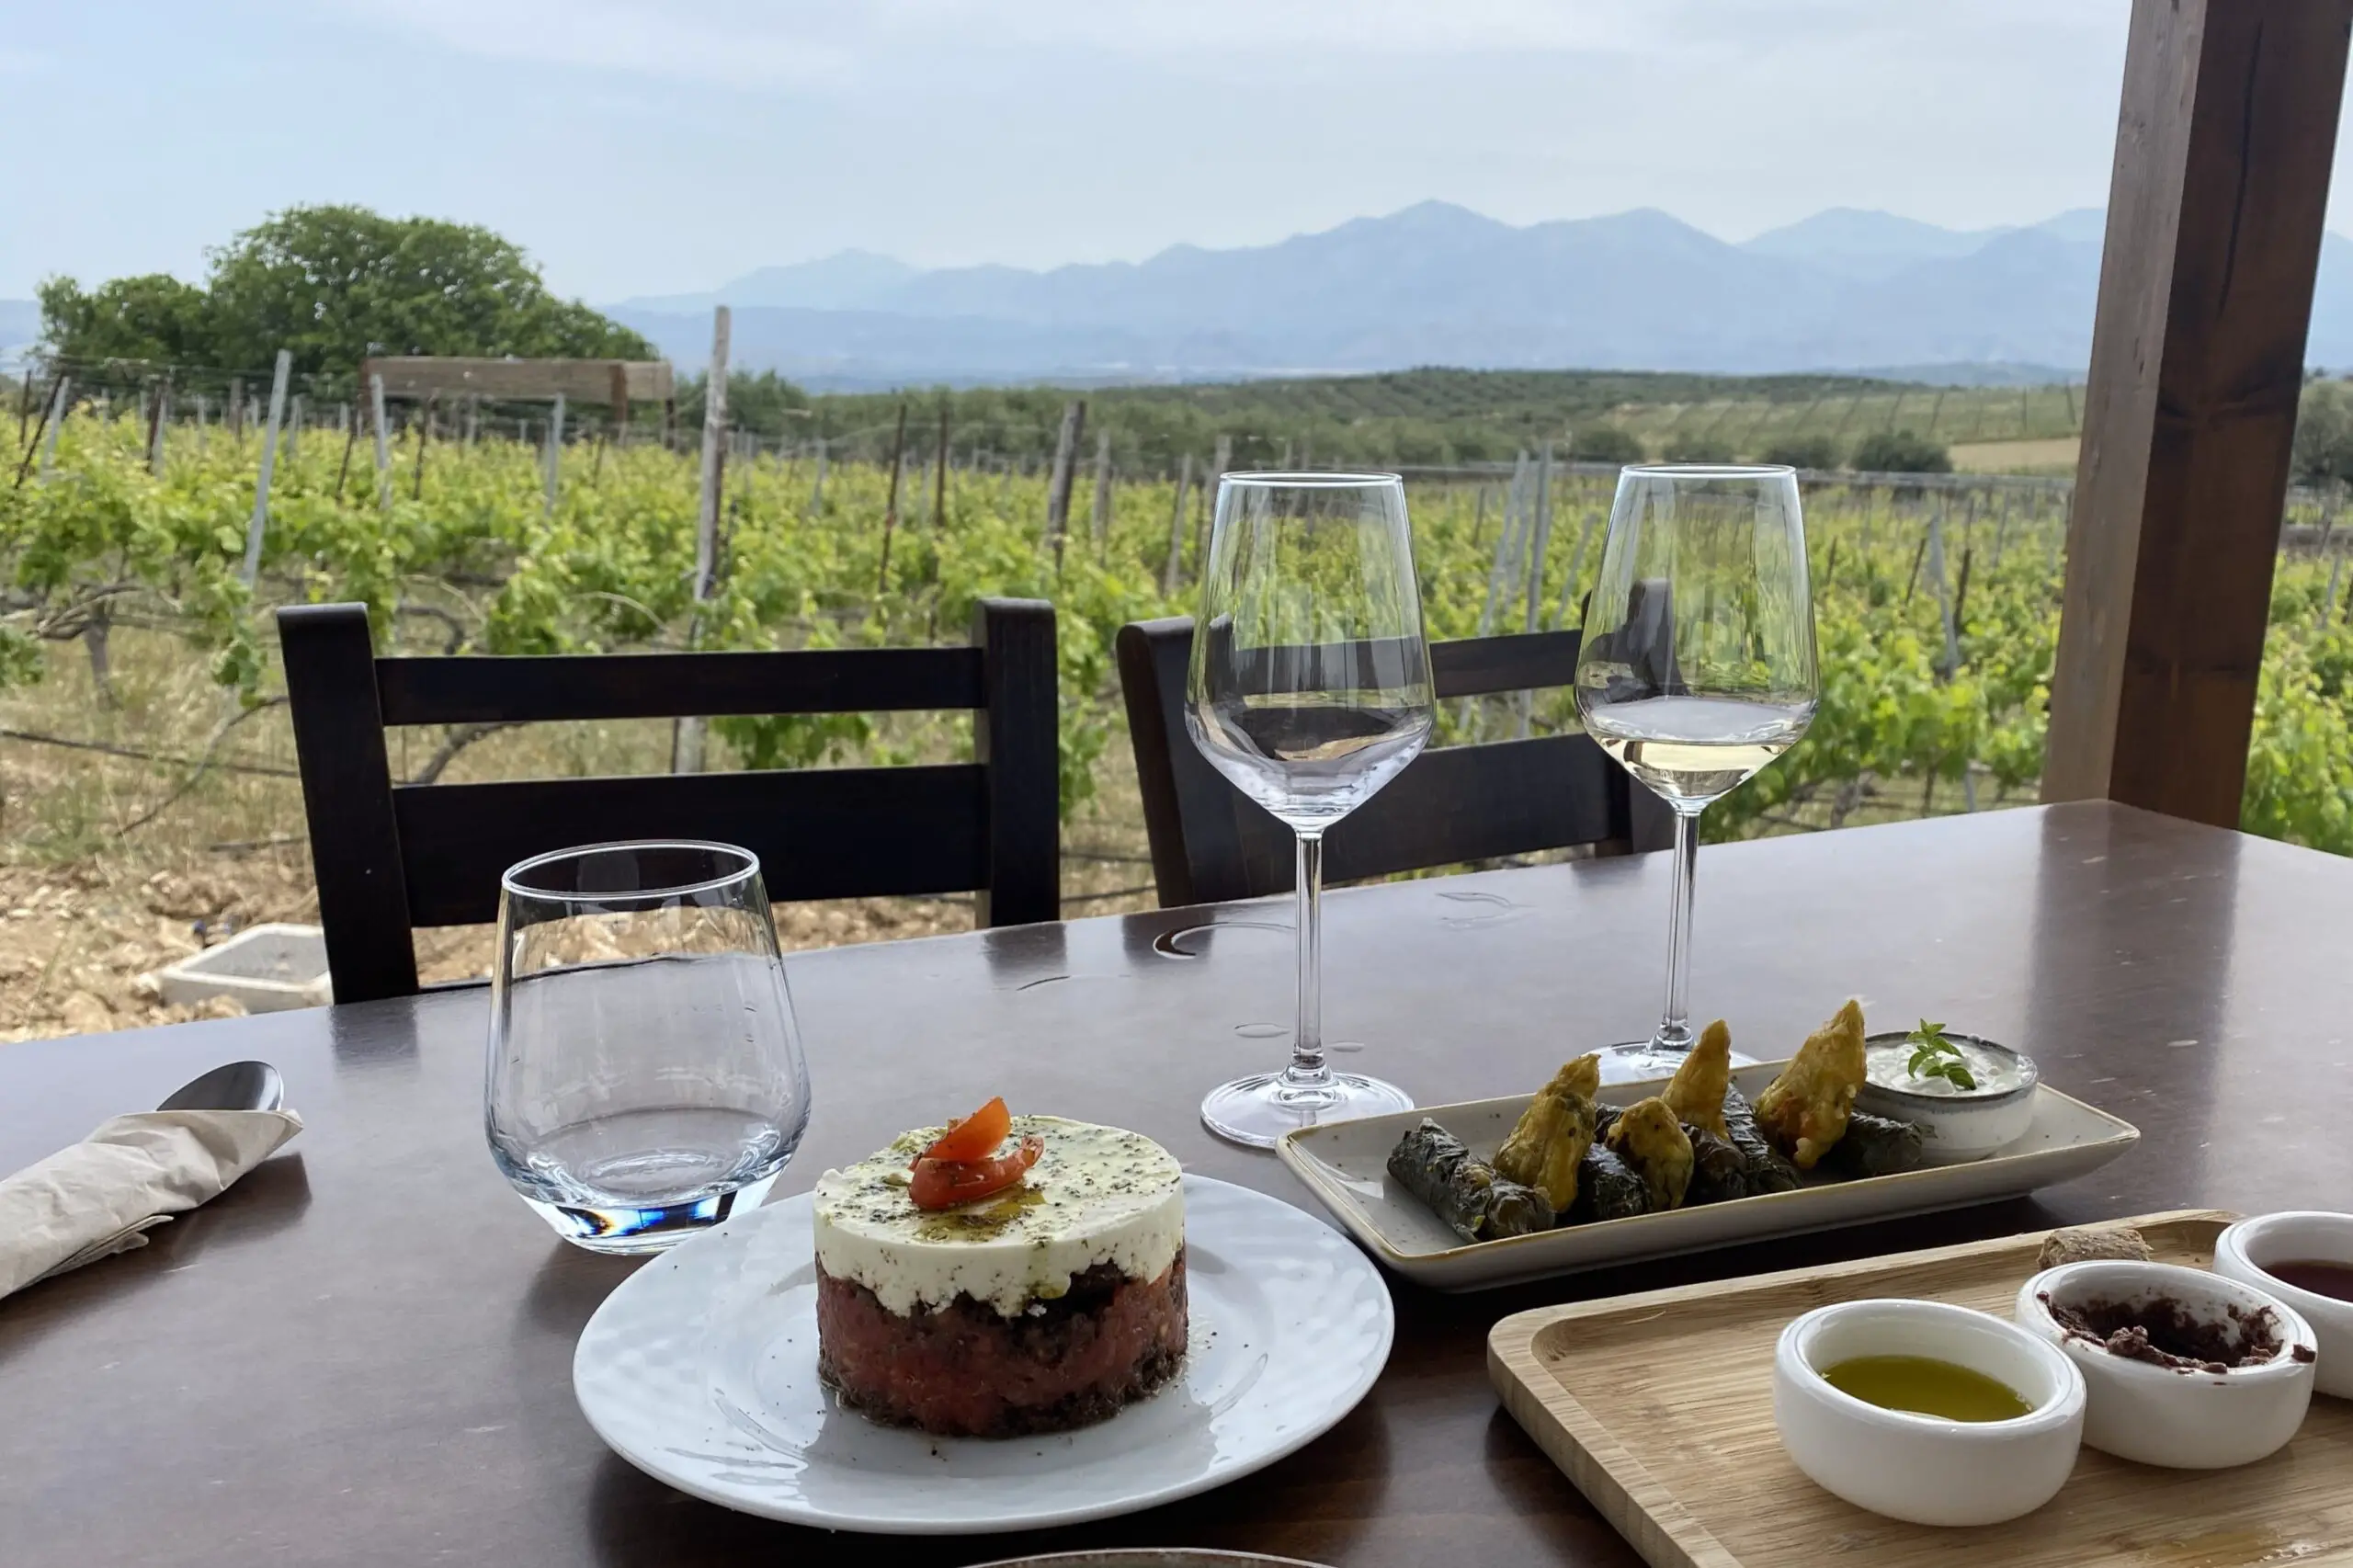 Crete has some particularly outstanding vineyards with good tastings and tours.